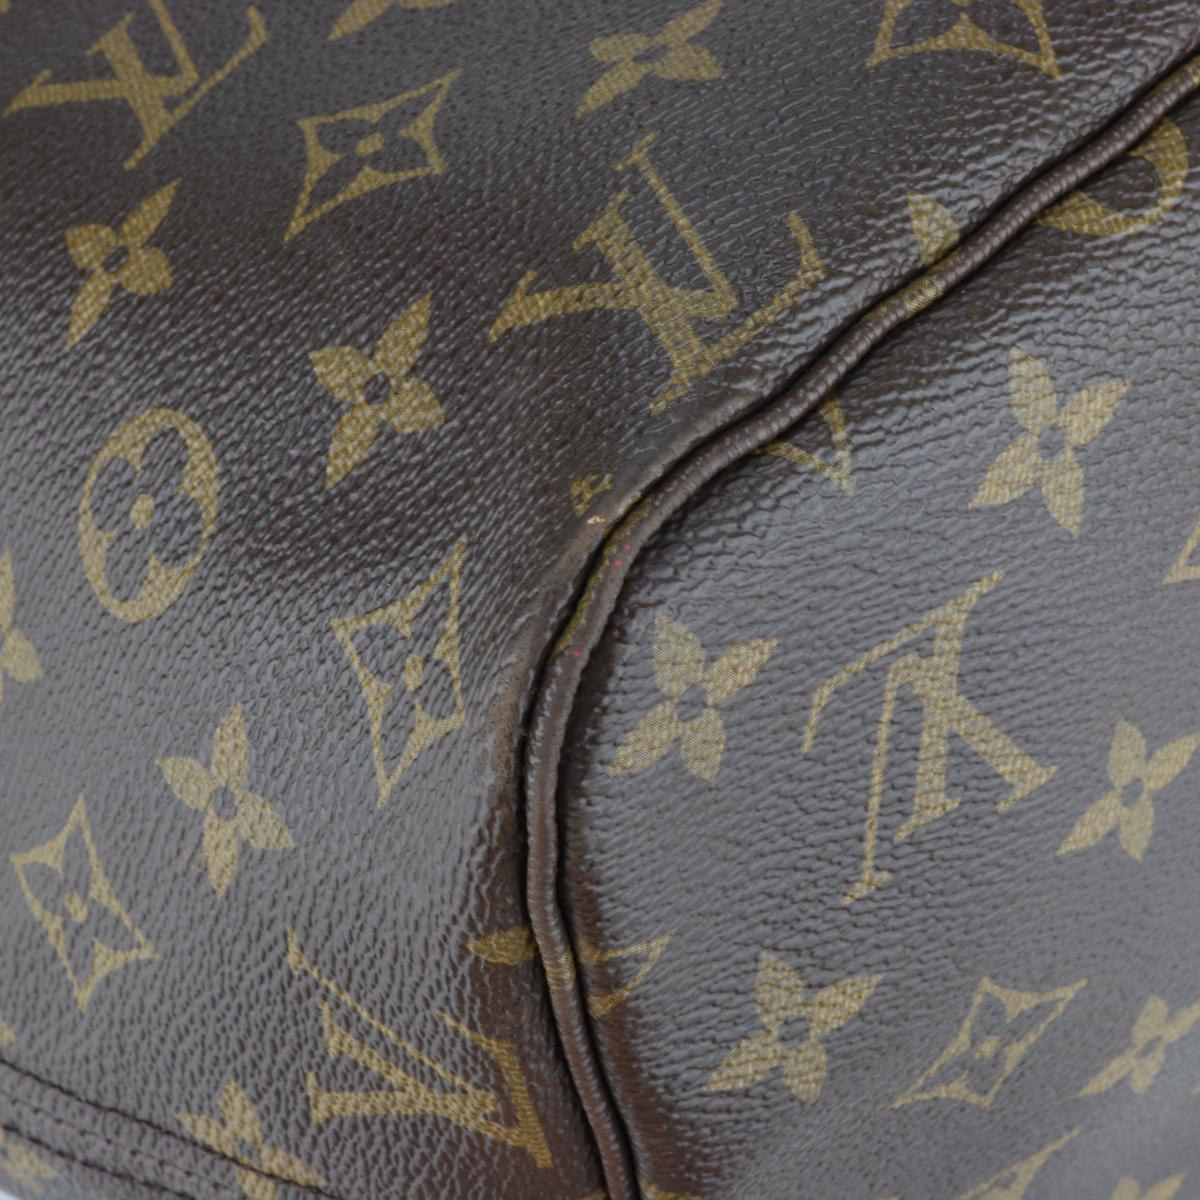 Louis Vuitton Neverfull MM Bag in Monogram with Beige Interior 2017 For Sale 4